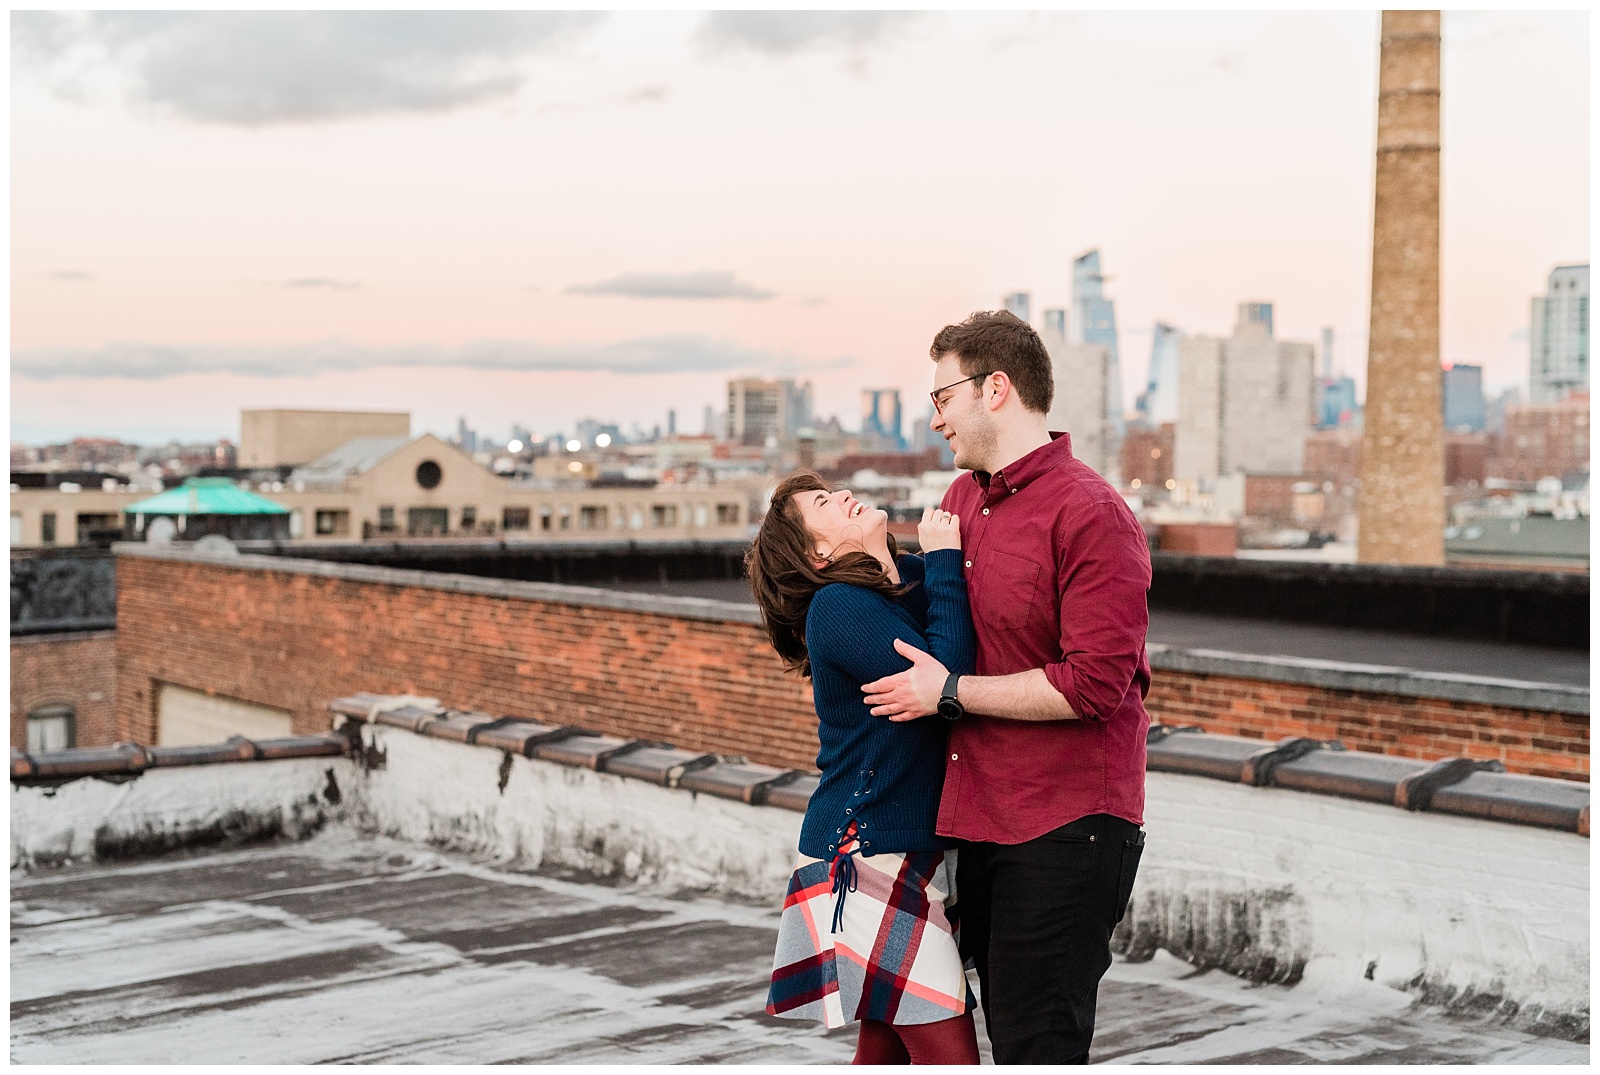 Hoboken, NJ, New Jersey, Rooftop, Engagement Session, Urban, City, Golden Hour, City, Skyline, Sunset, In Love, Romantic, Laughter